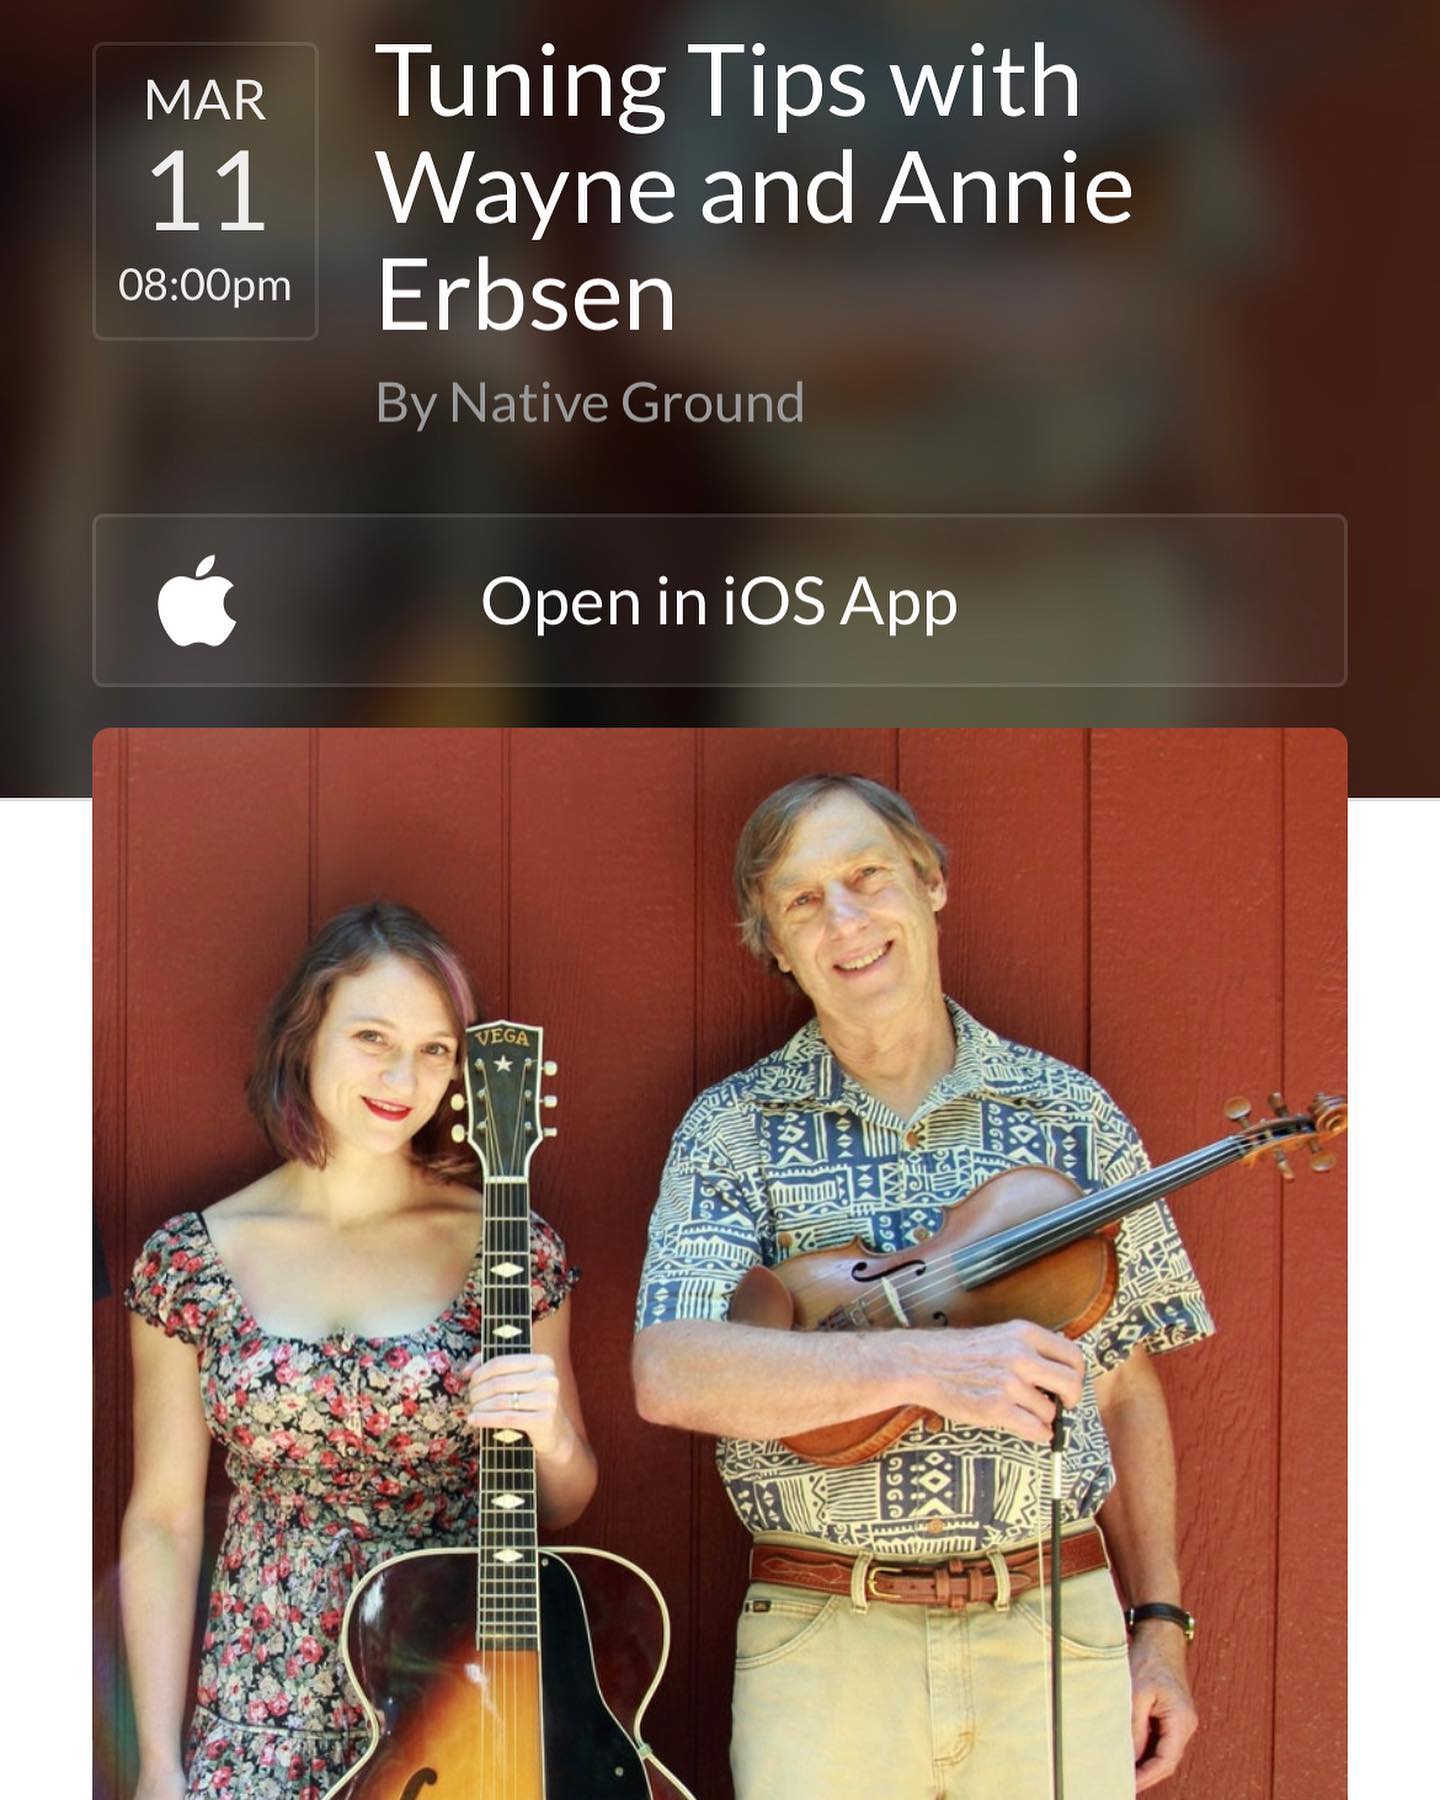 We invite you to tune in to past virtual lessons offered by the Native Ground team. Check out Tuning Tips with Wayne and Annie, a fun and FREE online workshop we offered last March! #linkinbio 

#bluegrass #bluegrassmusic #oldtime #oldtimemusic #banjo #fiddle #guitar #violin #tuning #appalachia #asheville #ashevillenc